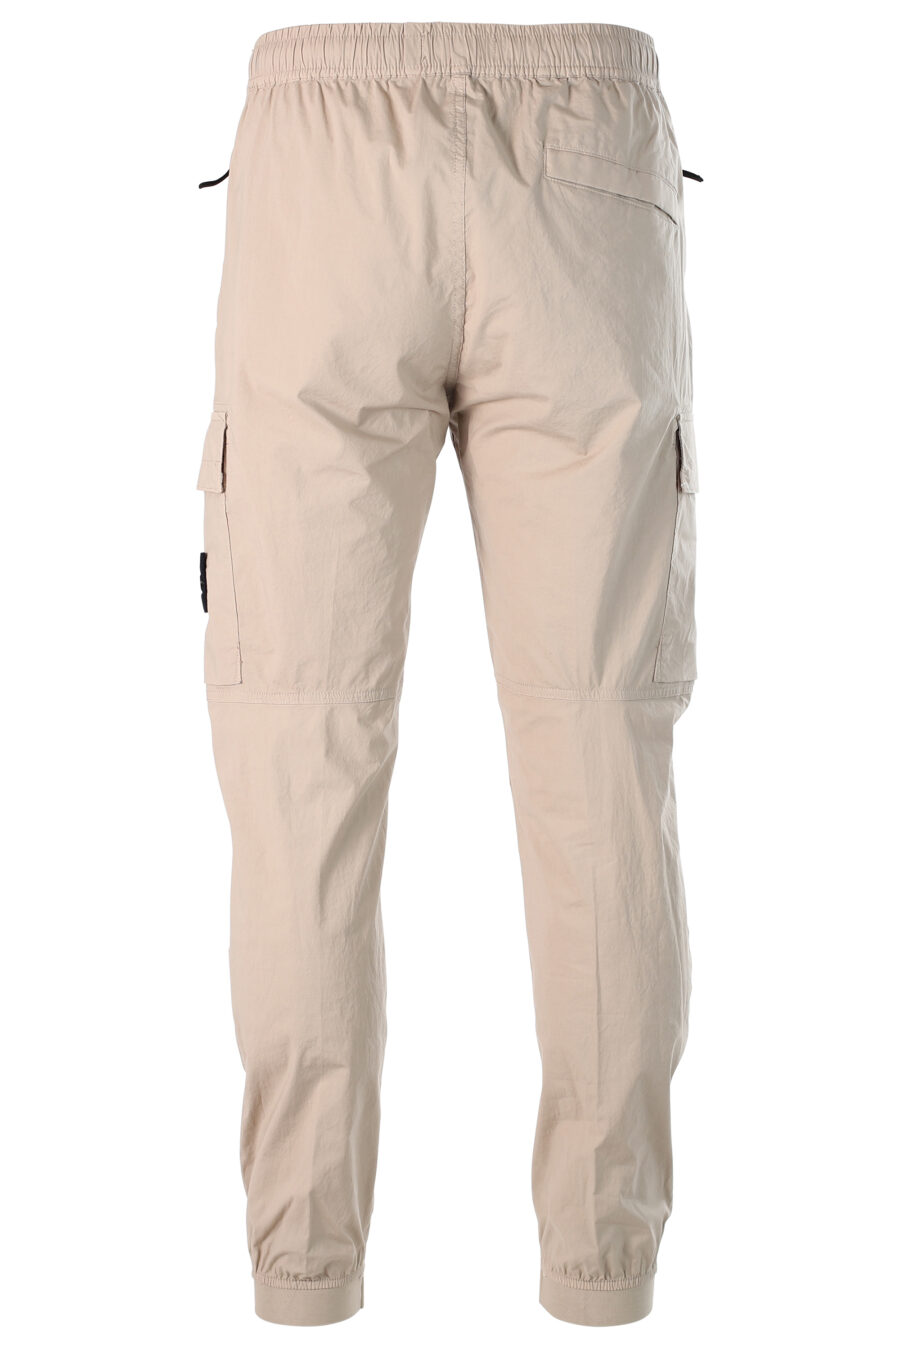 Beige cargo style trousers with patch - 8052572528552 3